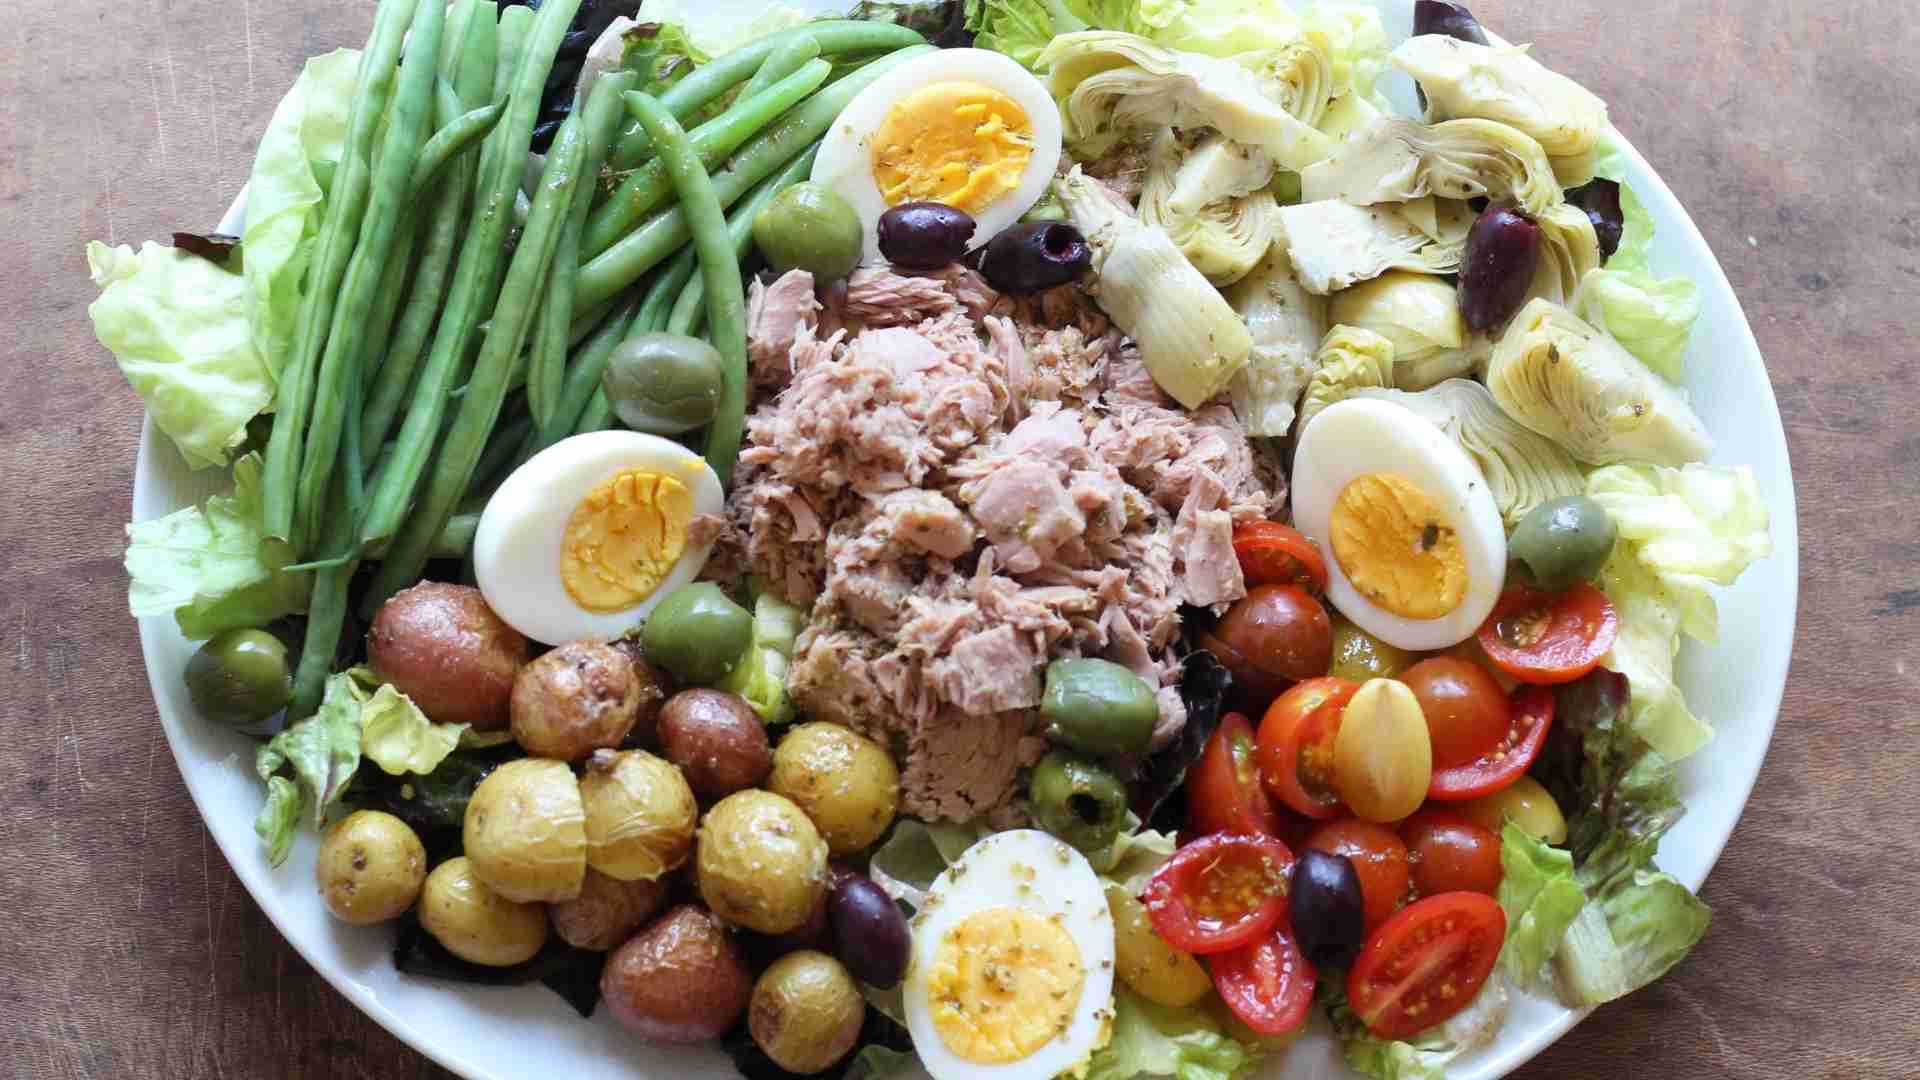 Nicoise Salad With Canned Tuna and Soft-boiled eggs